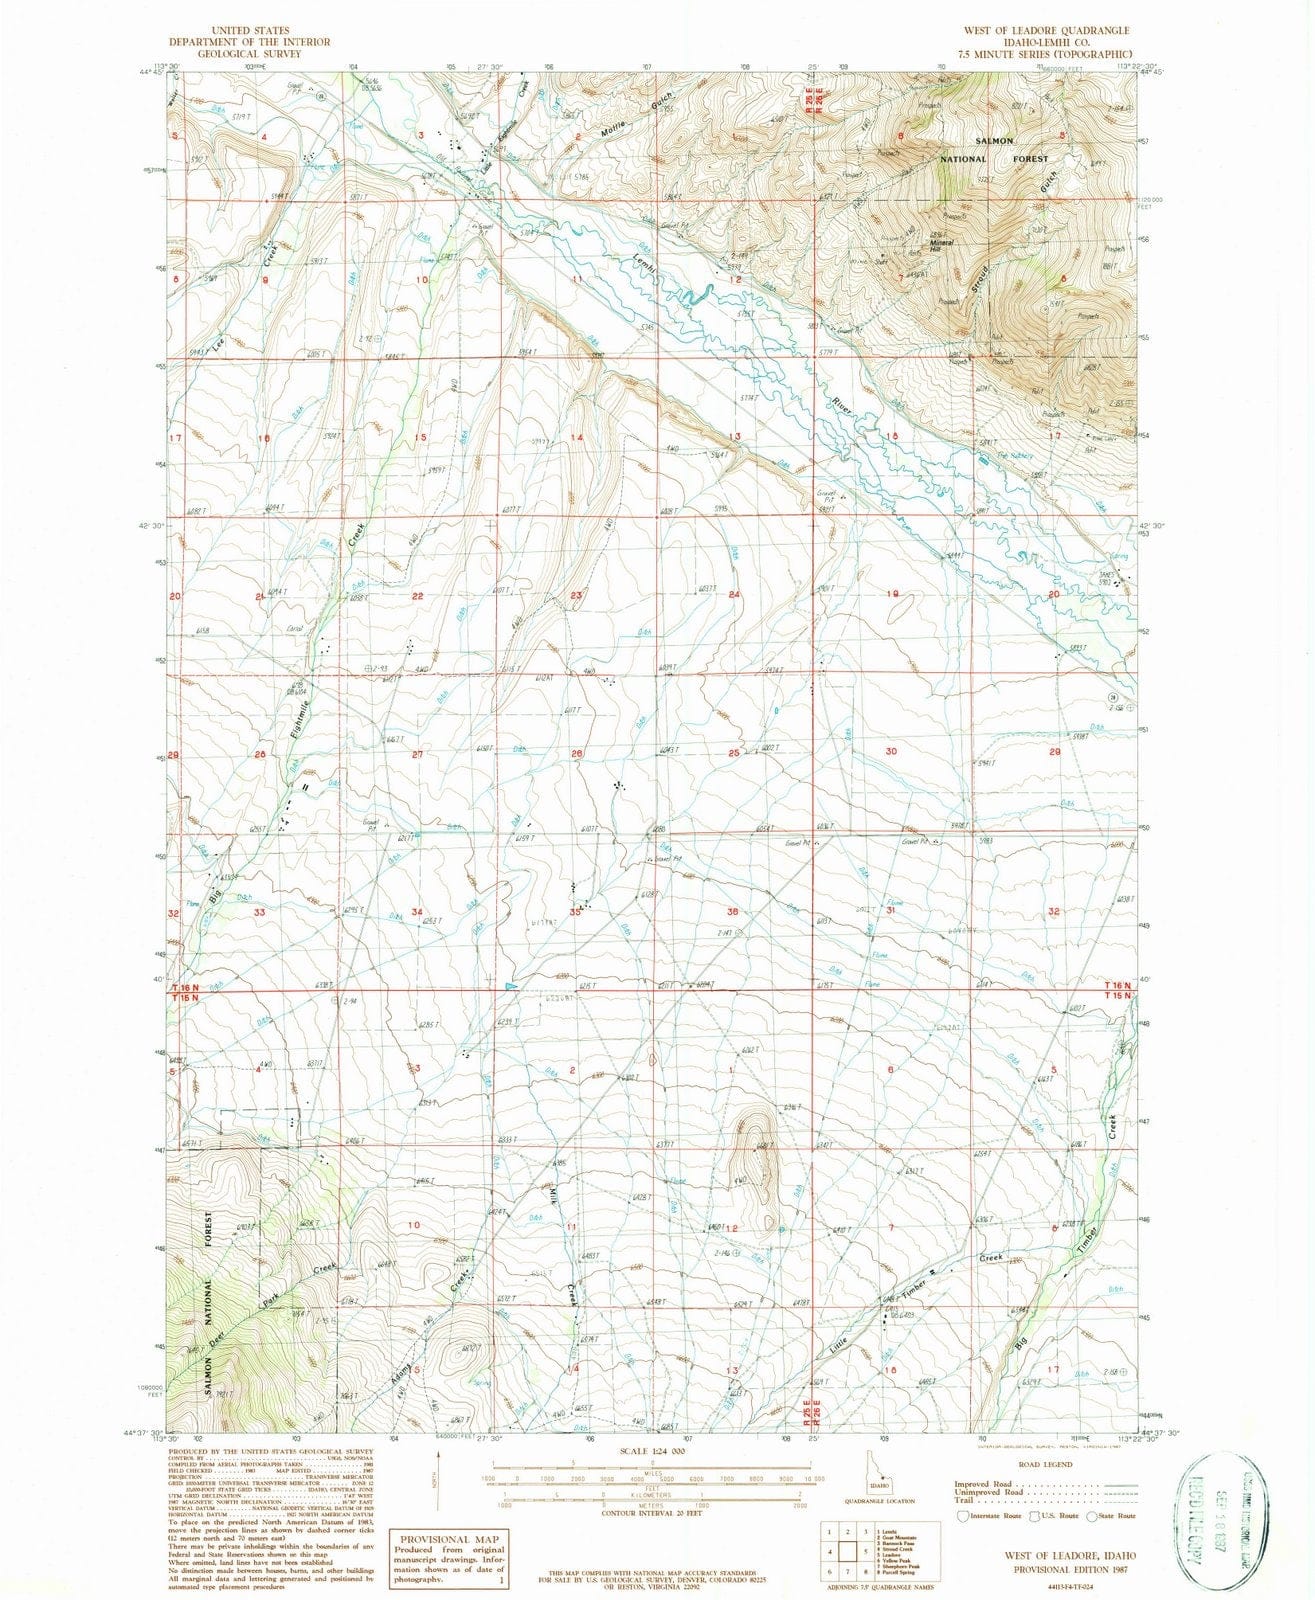 1987 West of Leadore, ID - Idaho - USGS Topographic Map